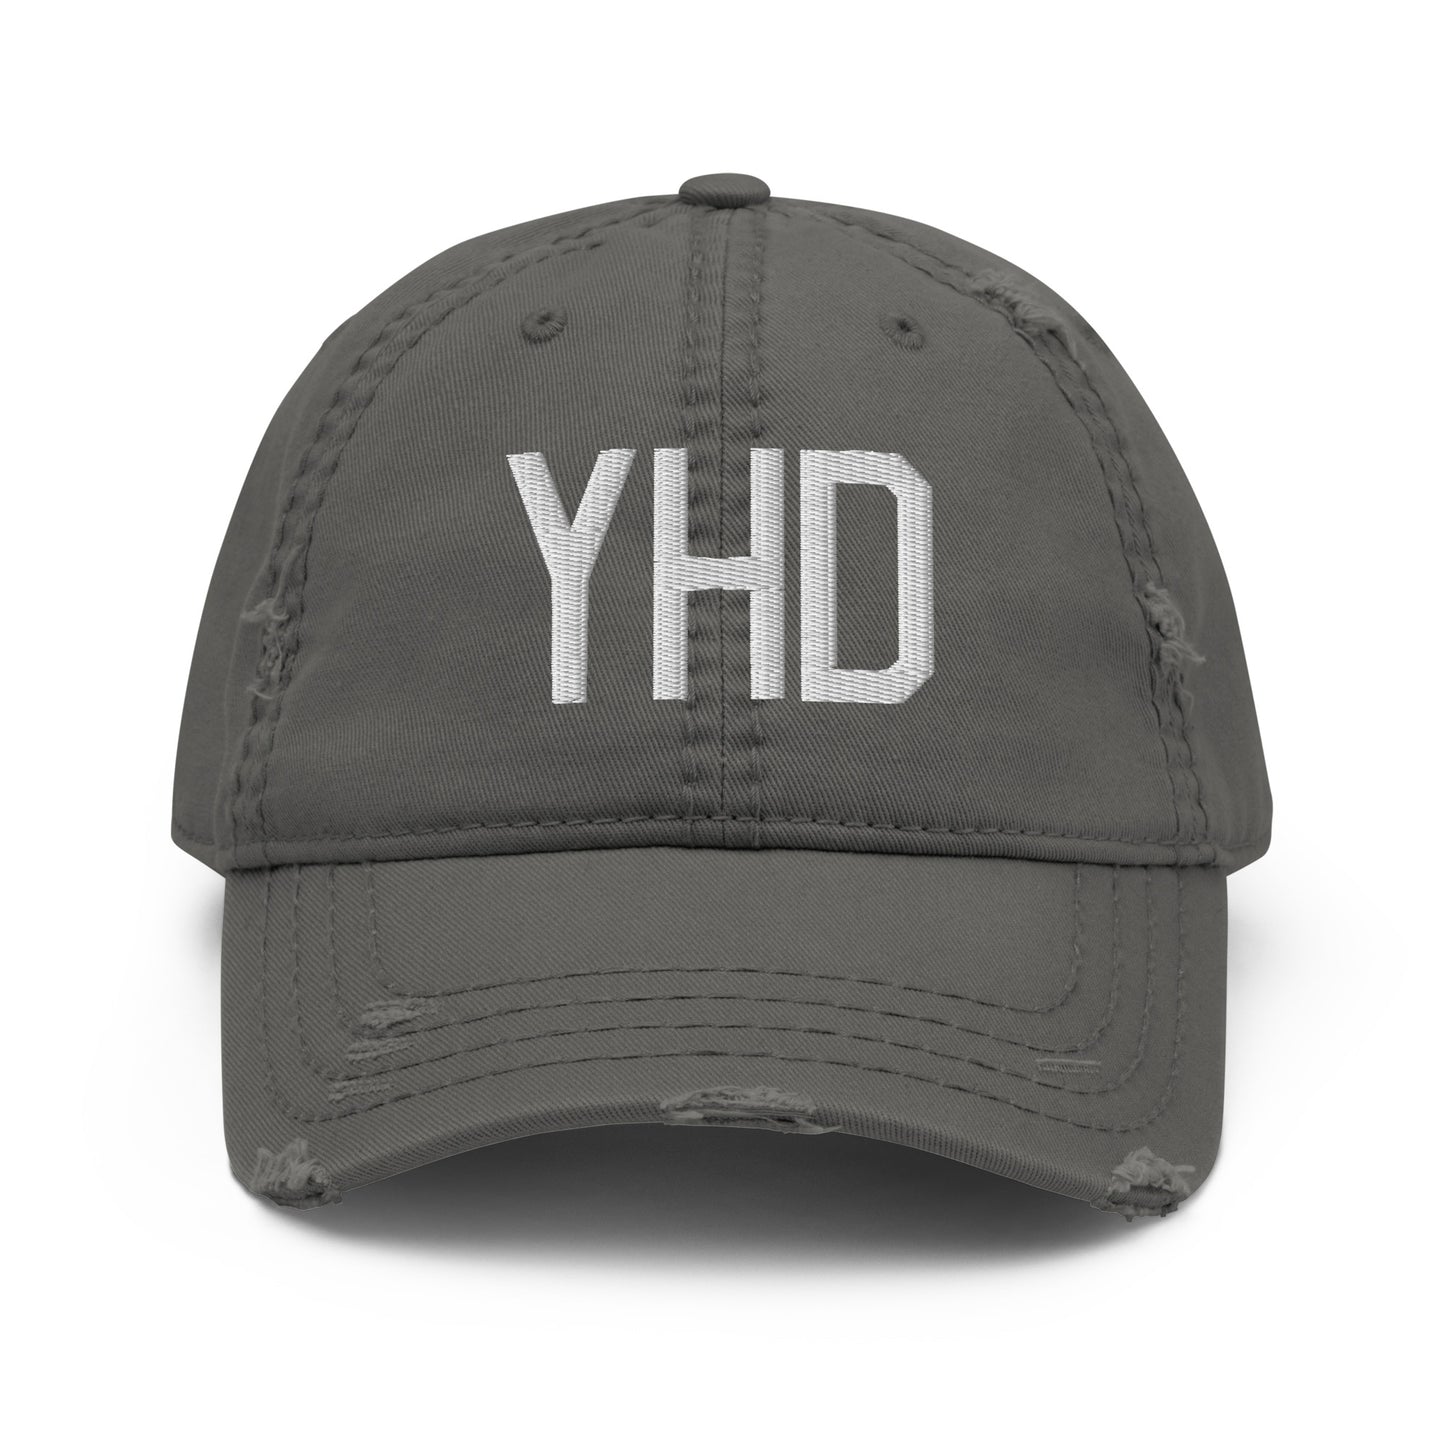 Airport Code Distressed Hat - White • YHD Dryden • YHM Designs - Image 15